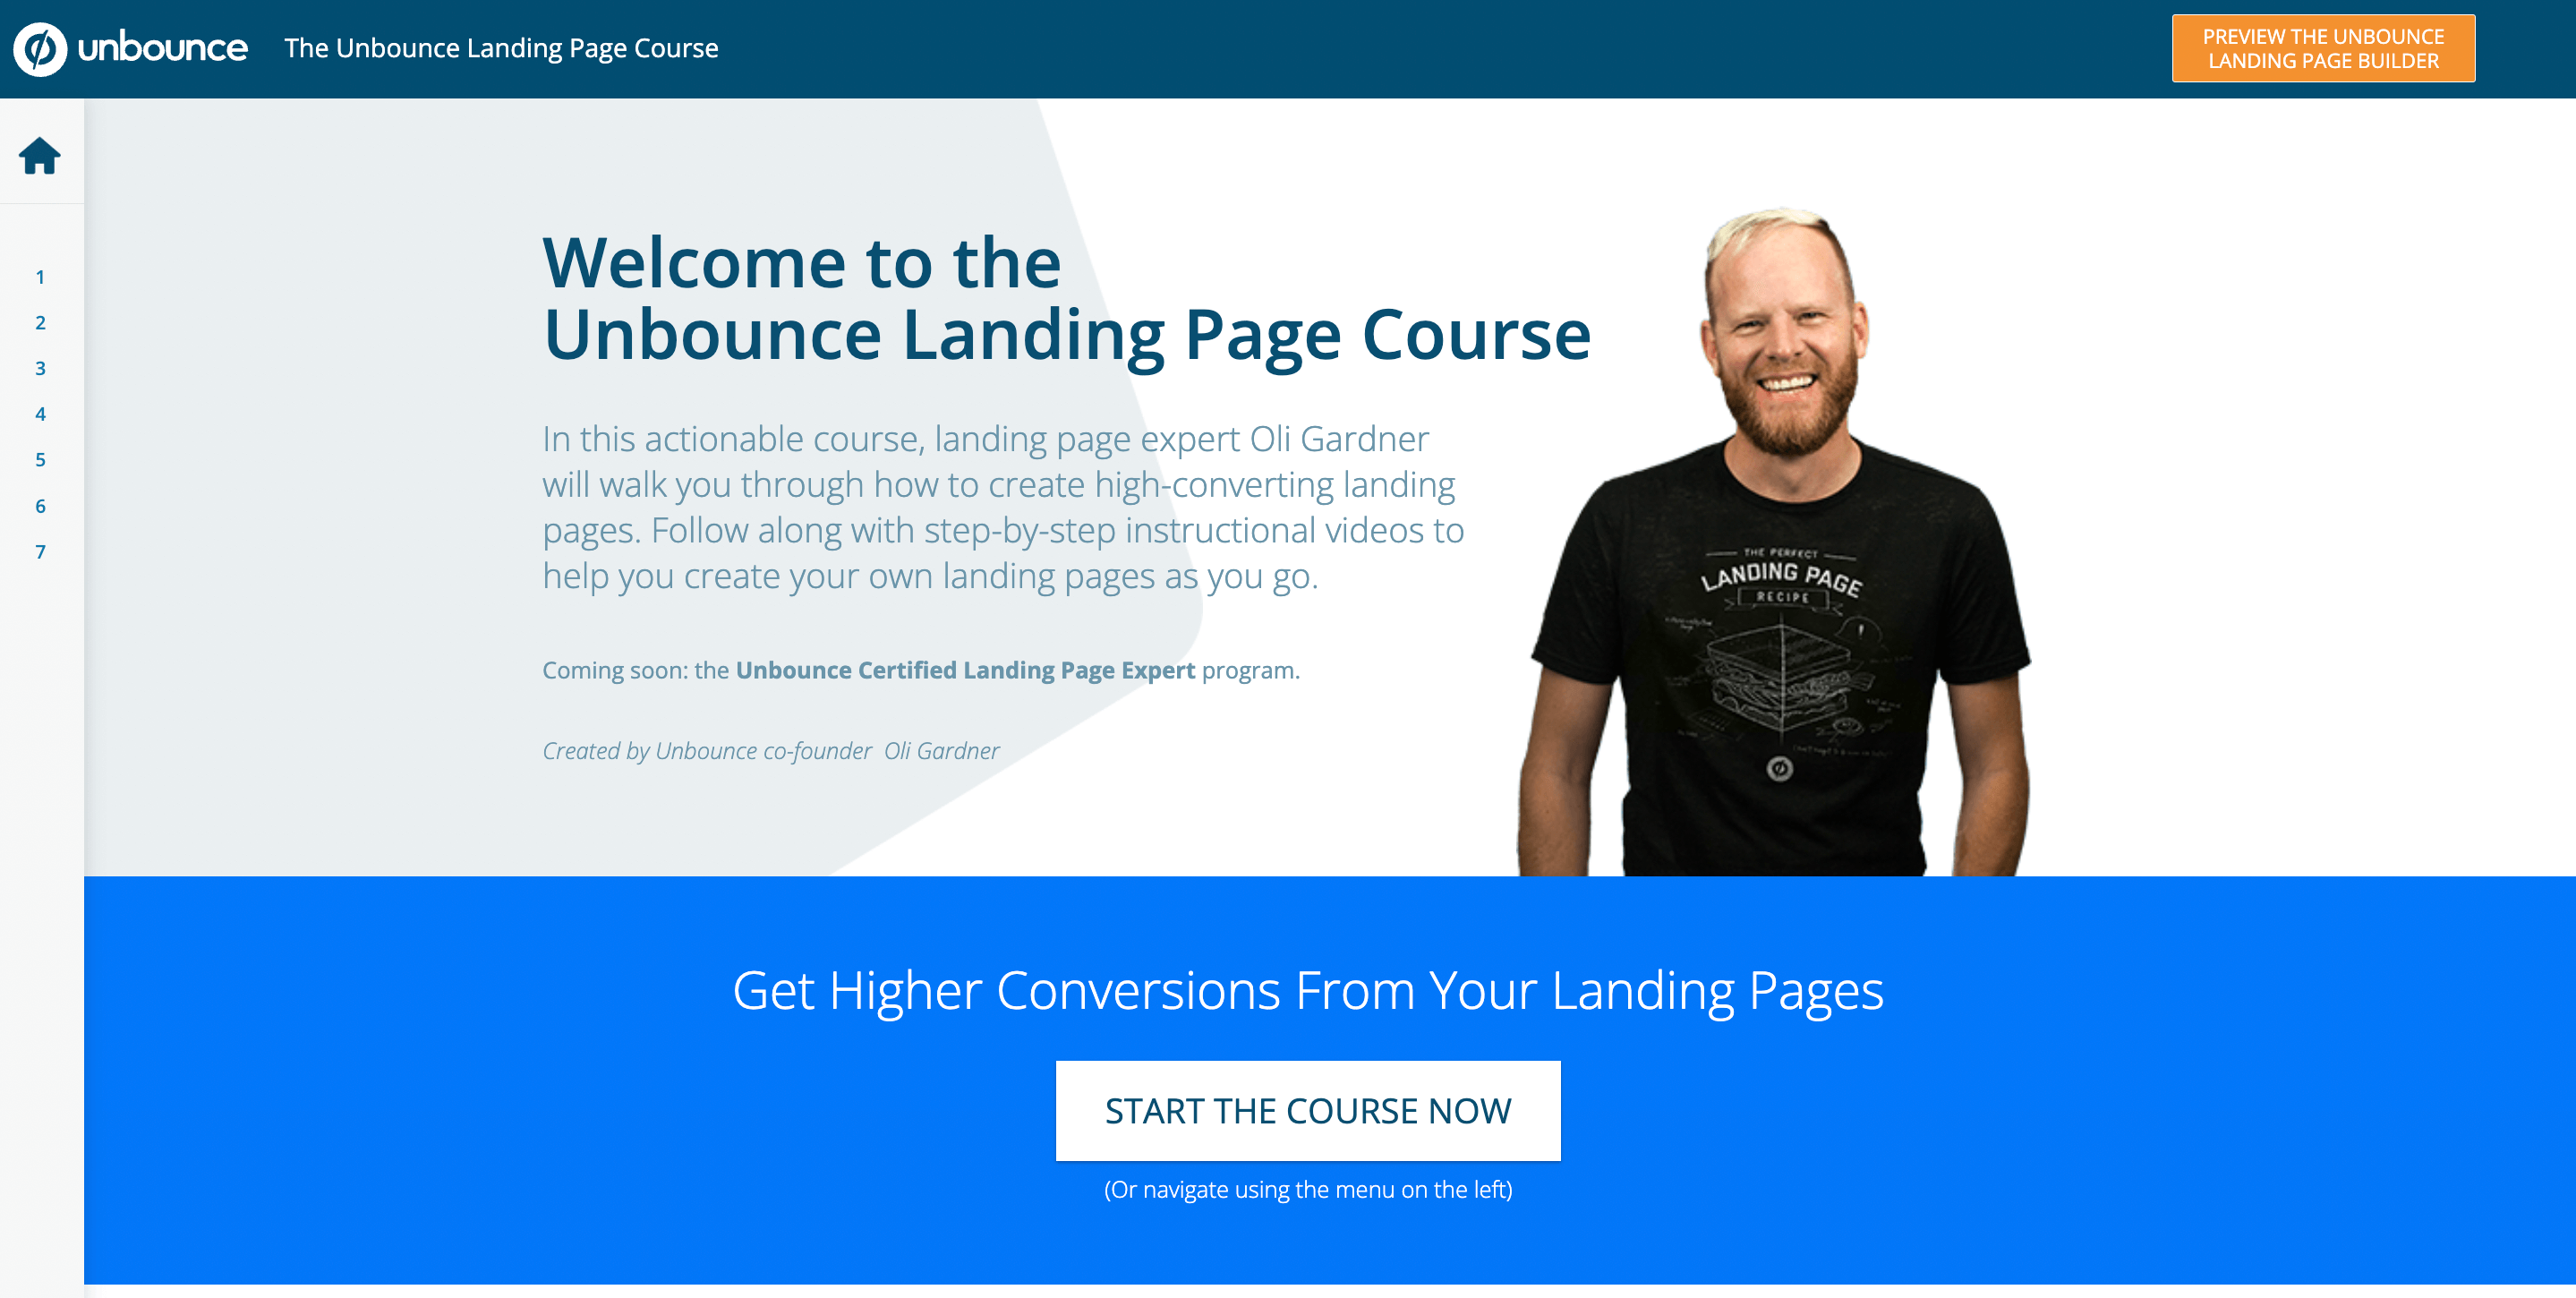 Homepage of Unbounce's Langing Page Class